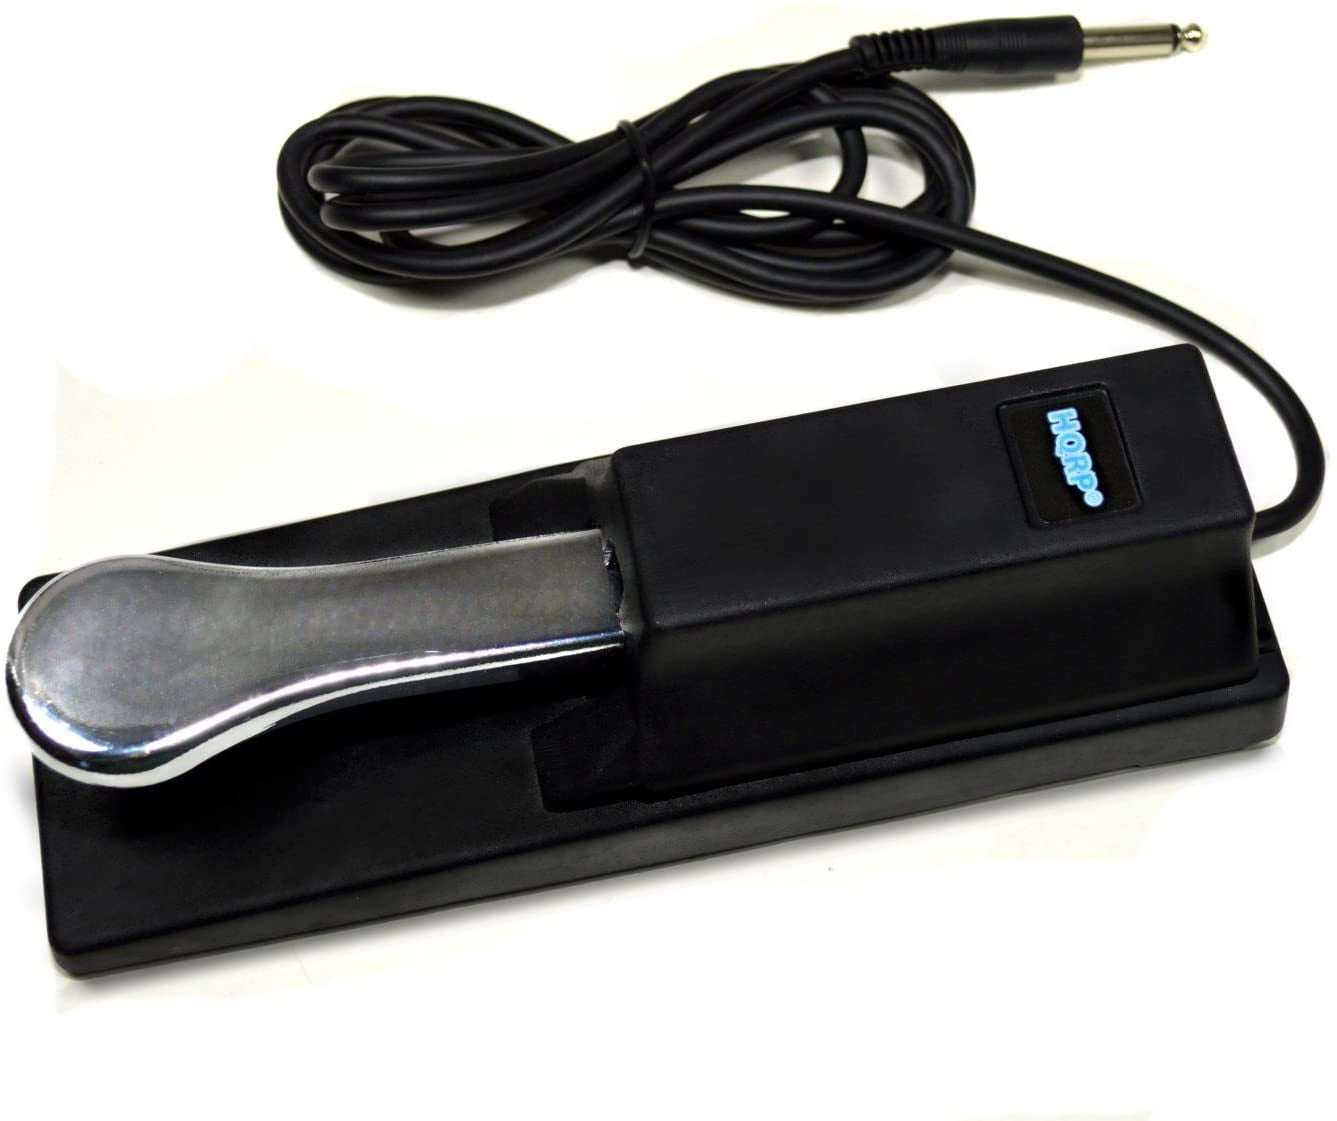 MaxLLTo Piano-Style Sustain Foot Pedal For Yamaha Dgx-200 Dgx-202 Dgx-205  Dgx-300 Dgx-305 Dgx-500 Dgx-505 Dgx-520 Dgx-530 Dgx-620 Dgx-630, Silver